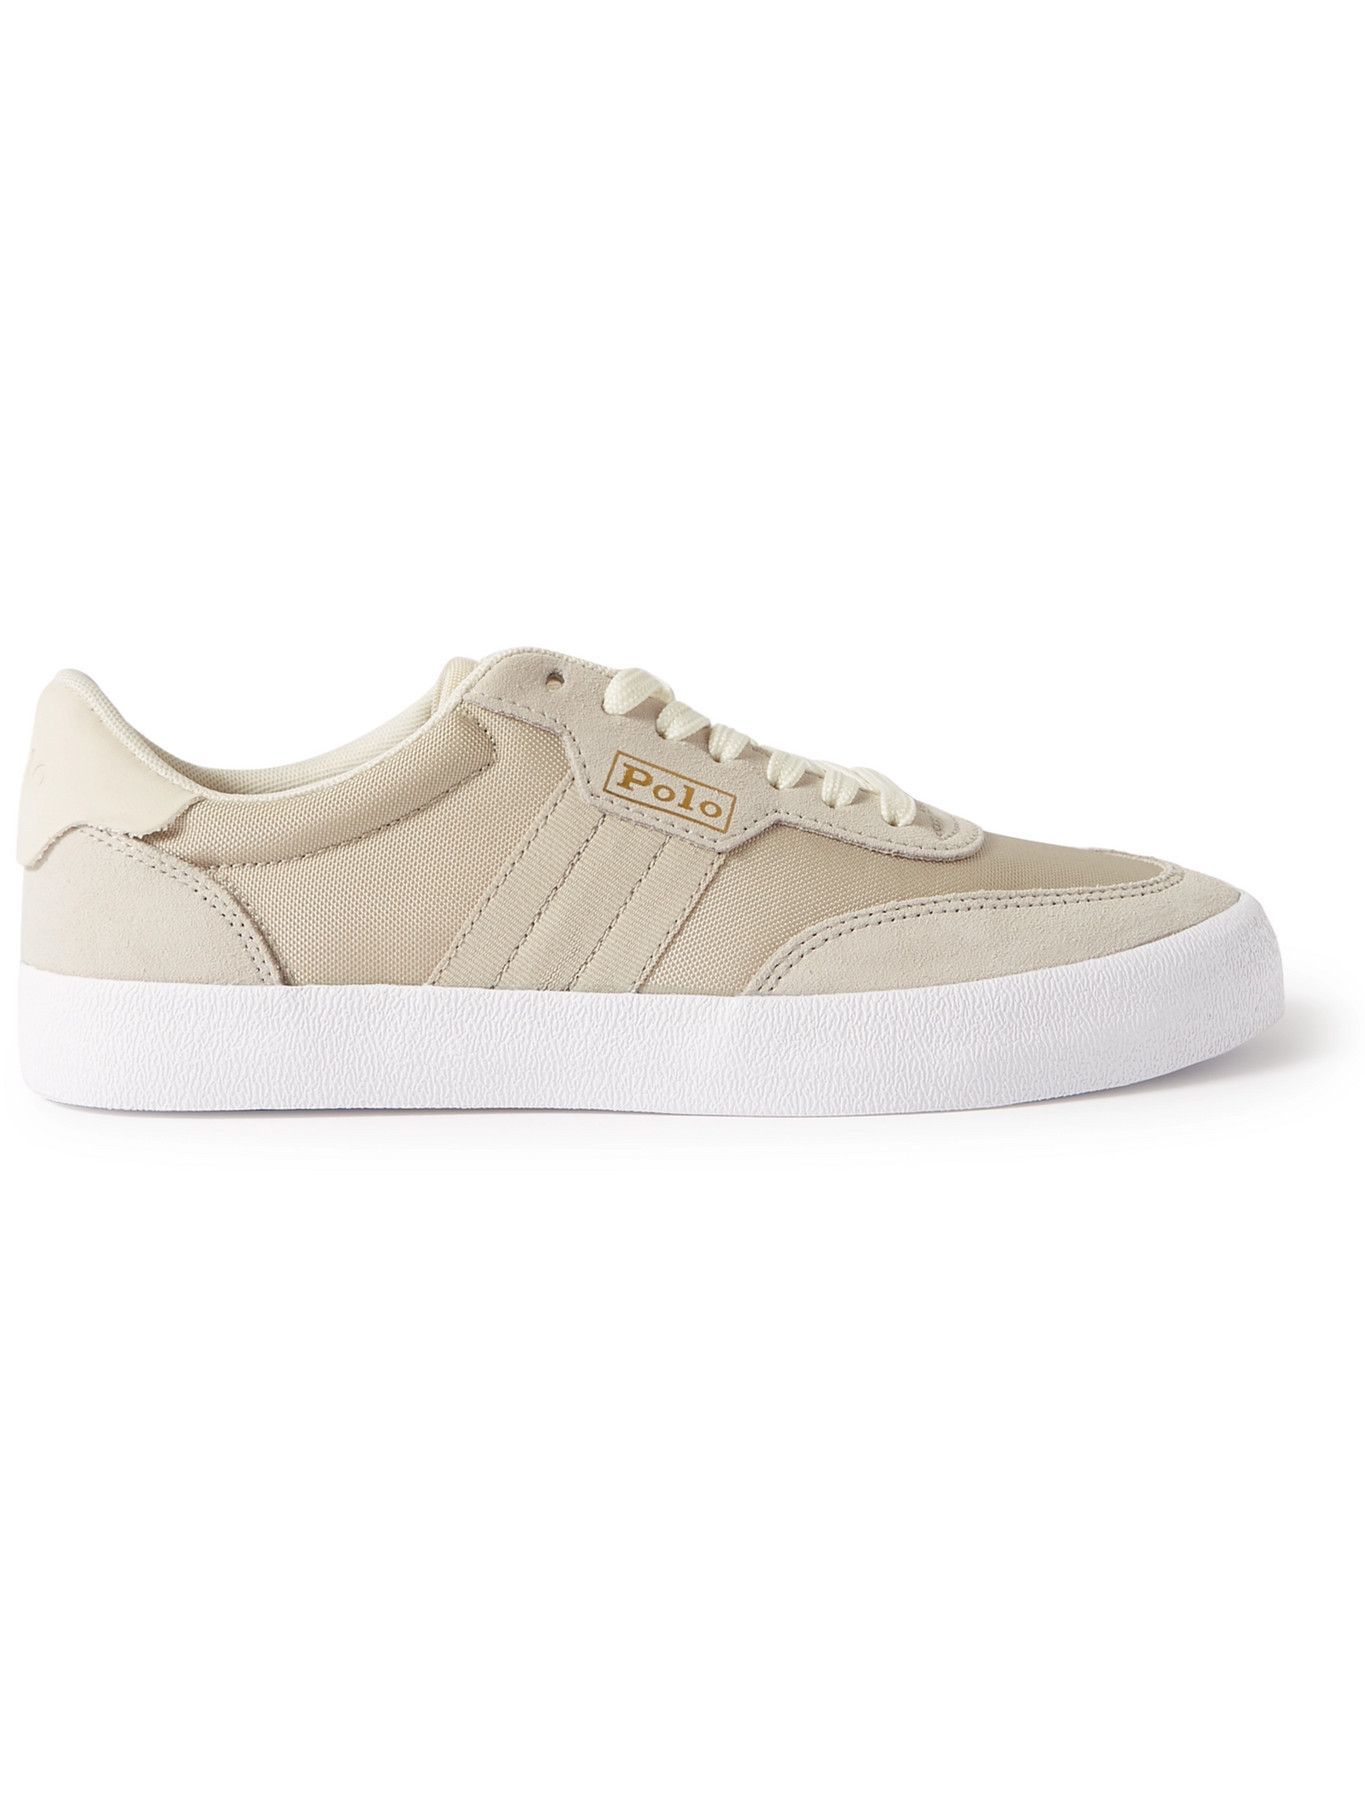 Photo: Polo Ralph Lauren - Court Vulc Leather, Suede and Canvas Sneakers - Neutrals